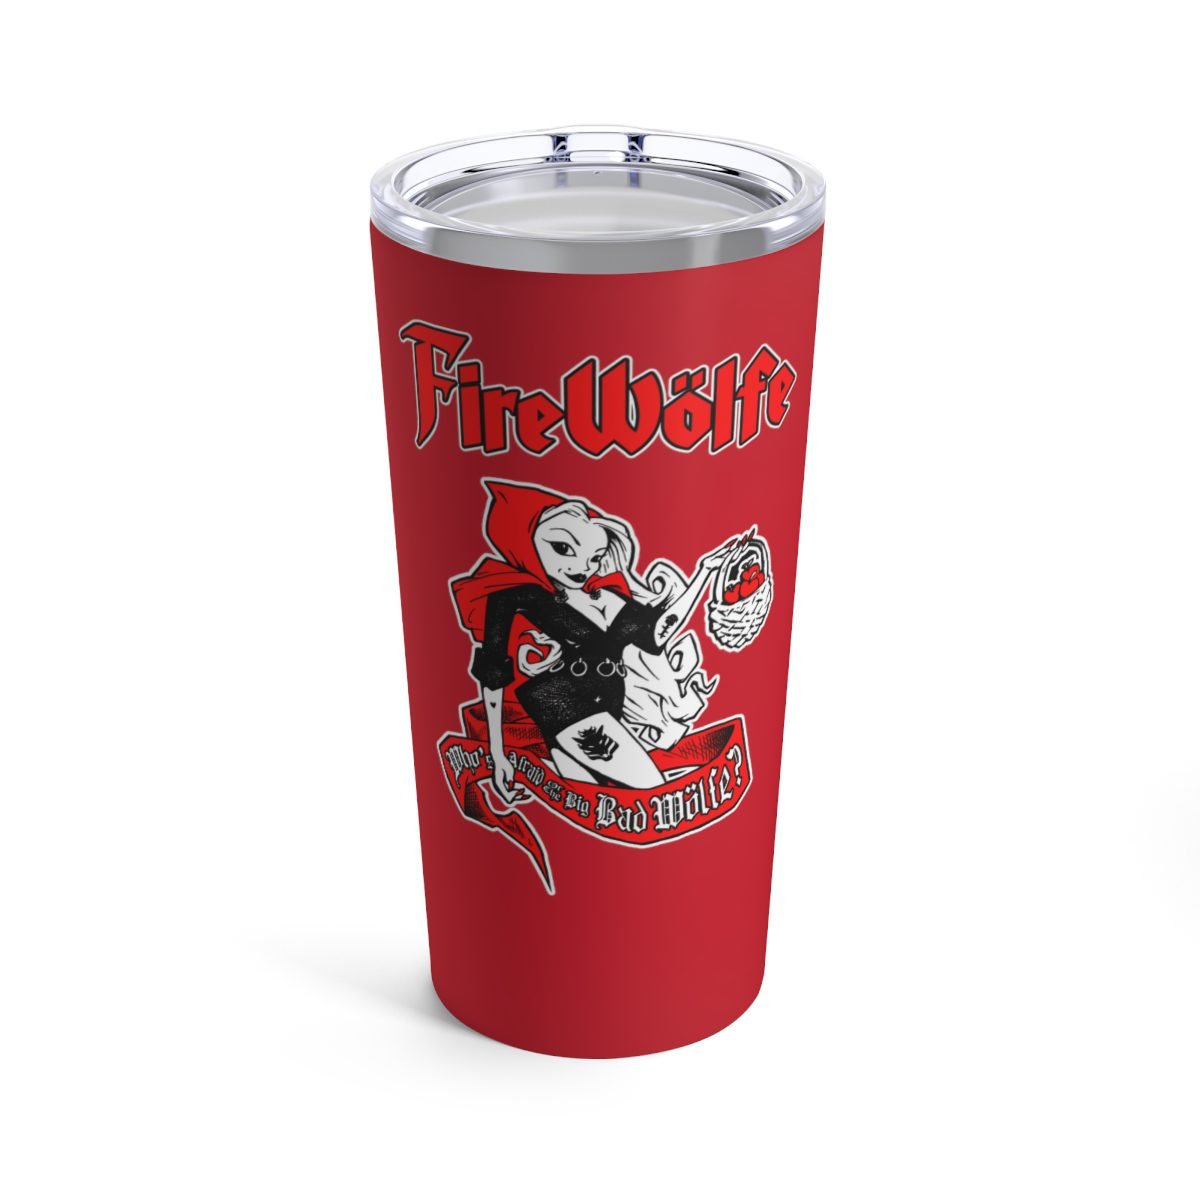 FireWolfe – Who’s Afraid 20oz Red Stainless Steel Tumbler